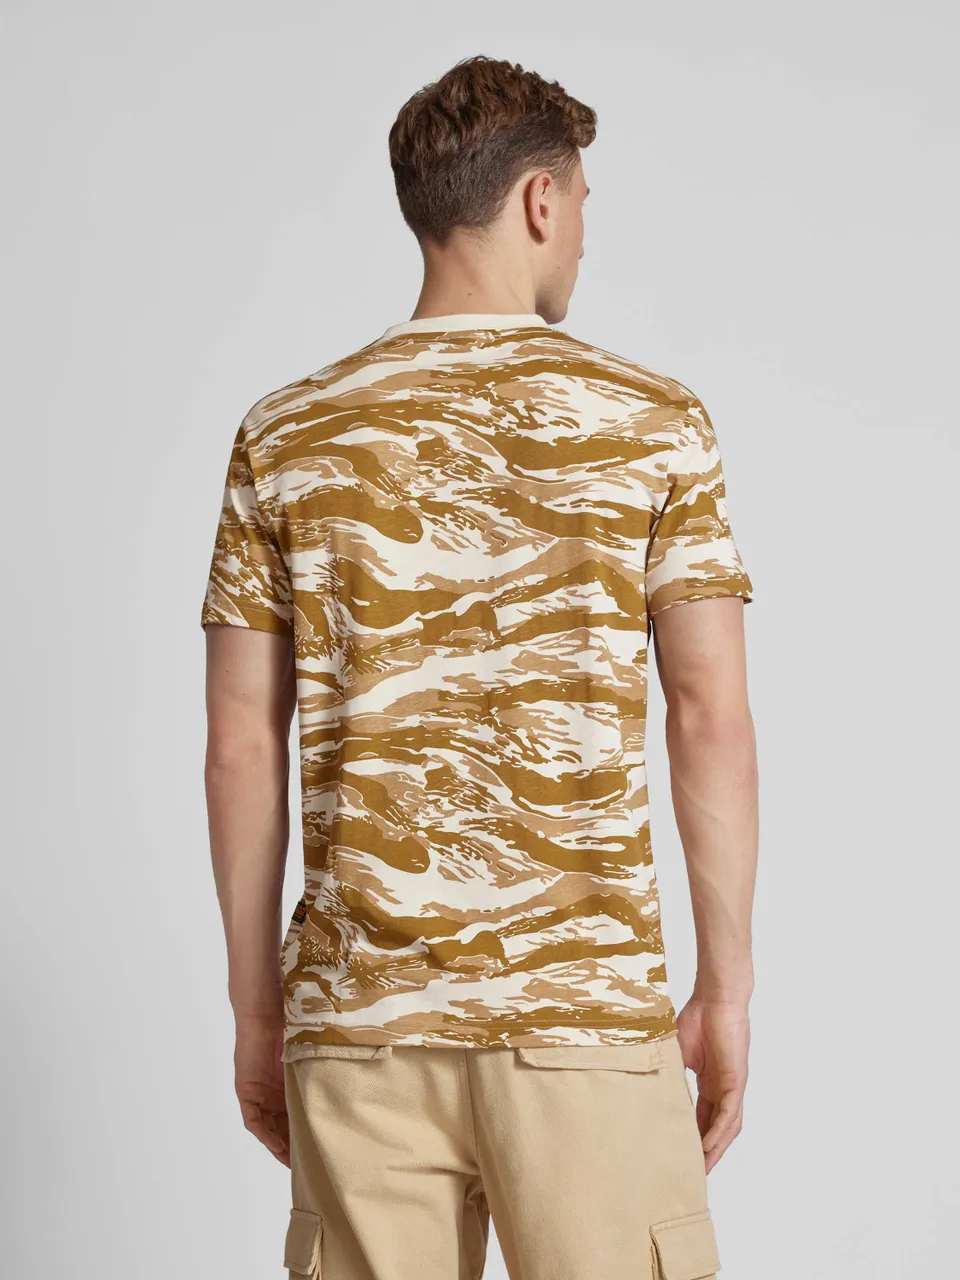 T-Shirt mit Camouflage-Muster Modell 'Tiger'